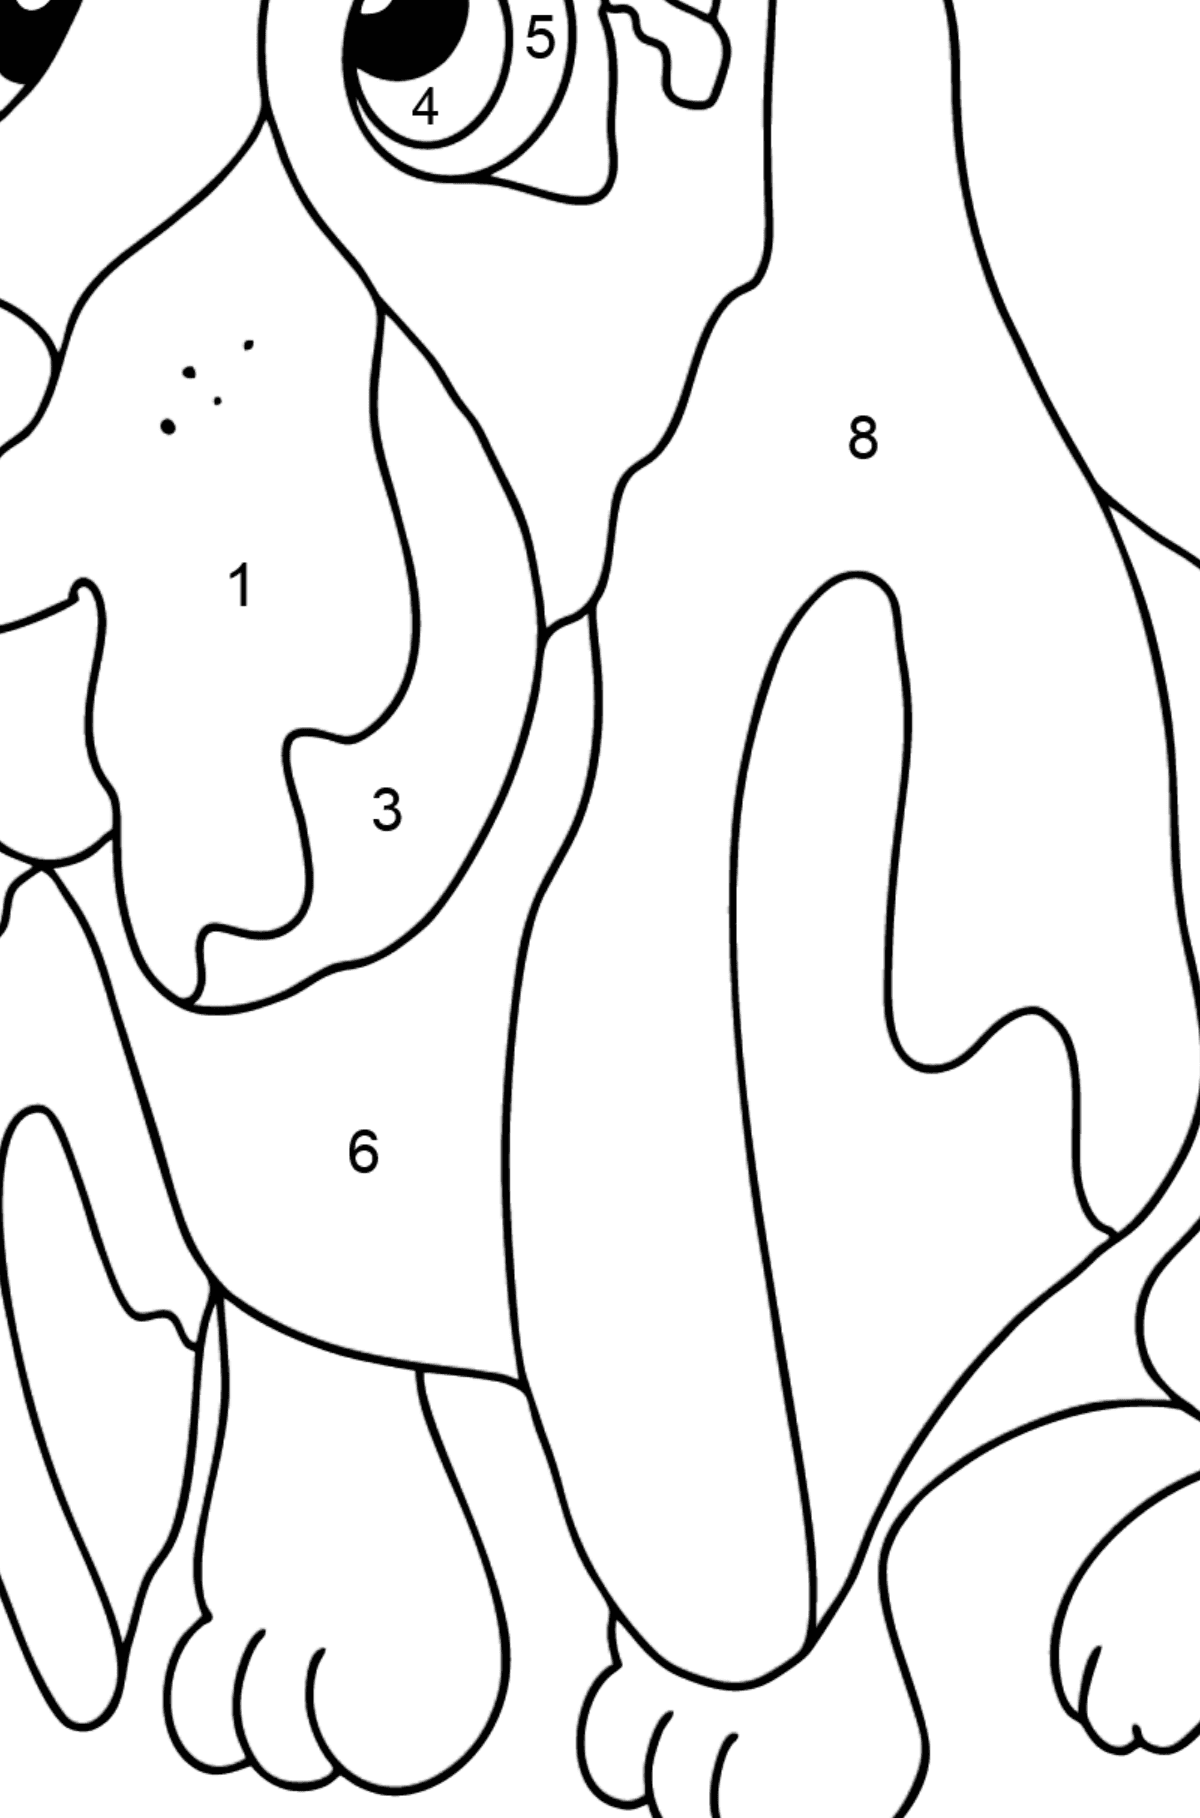 Coloring Page - A Dog is Sitting near a Bone - Coloring by Numbers for Kids